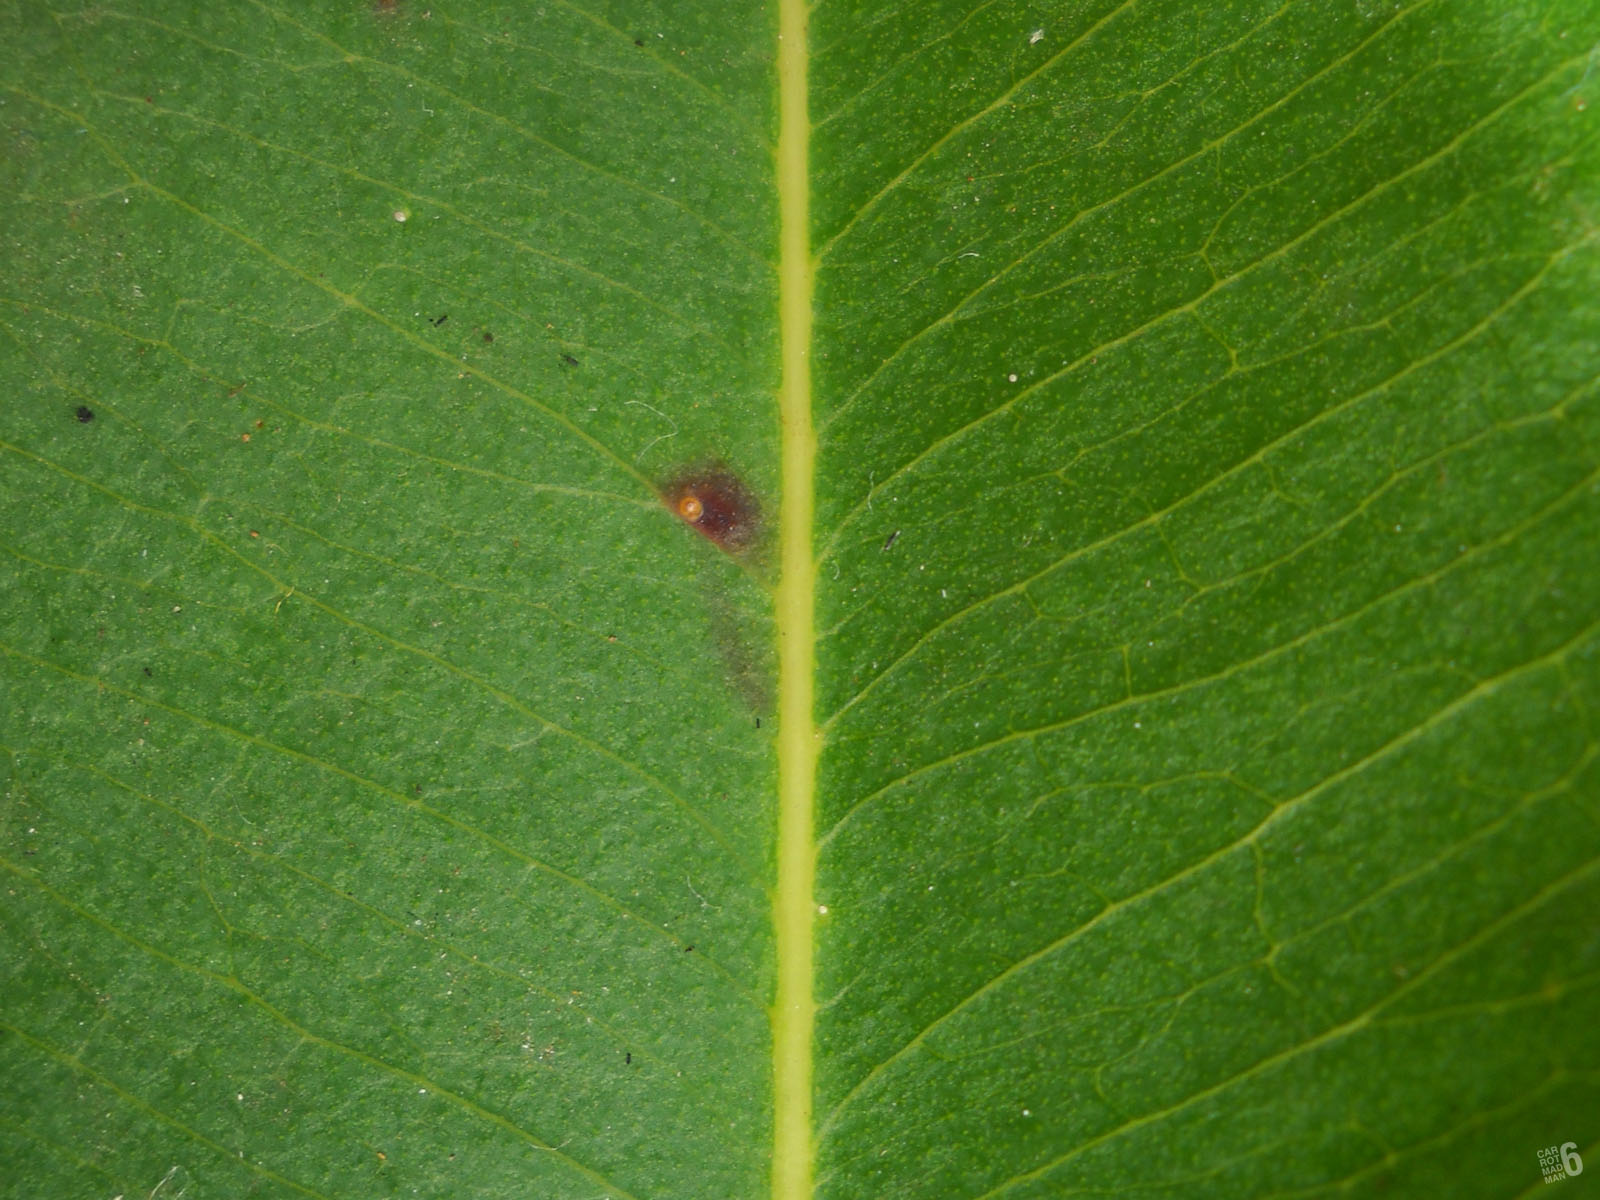 a red bug is walking down a green leaf